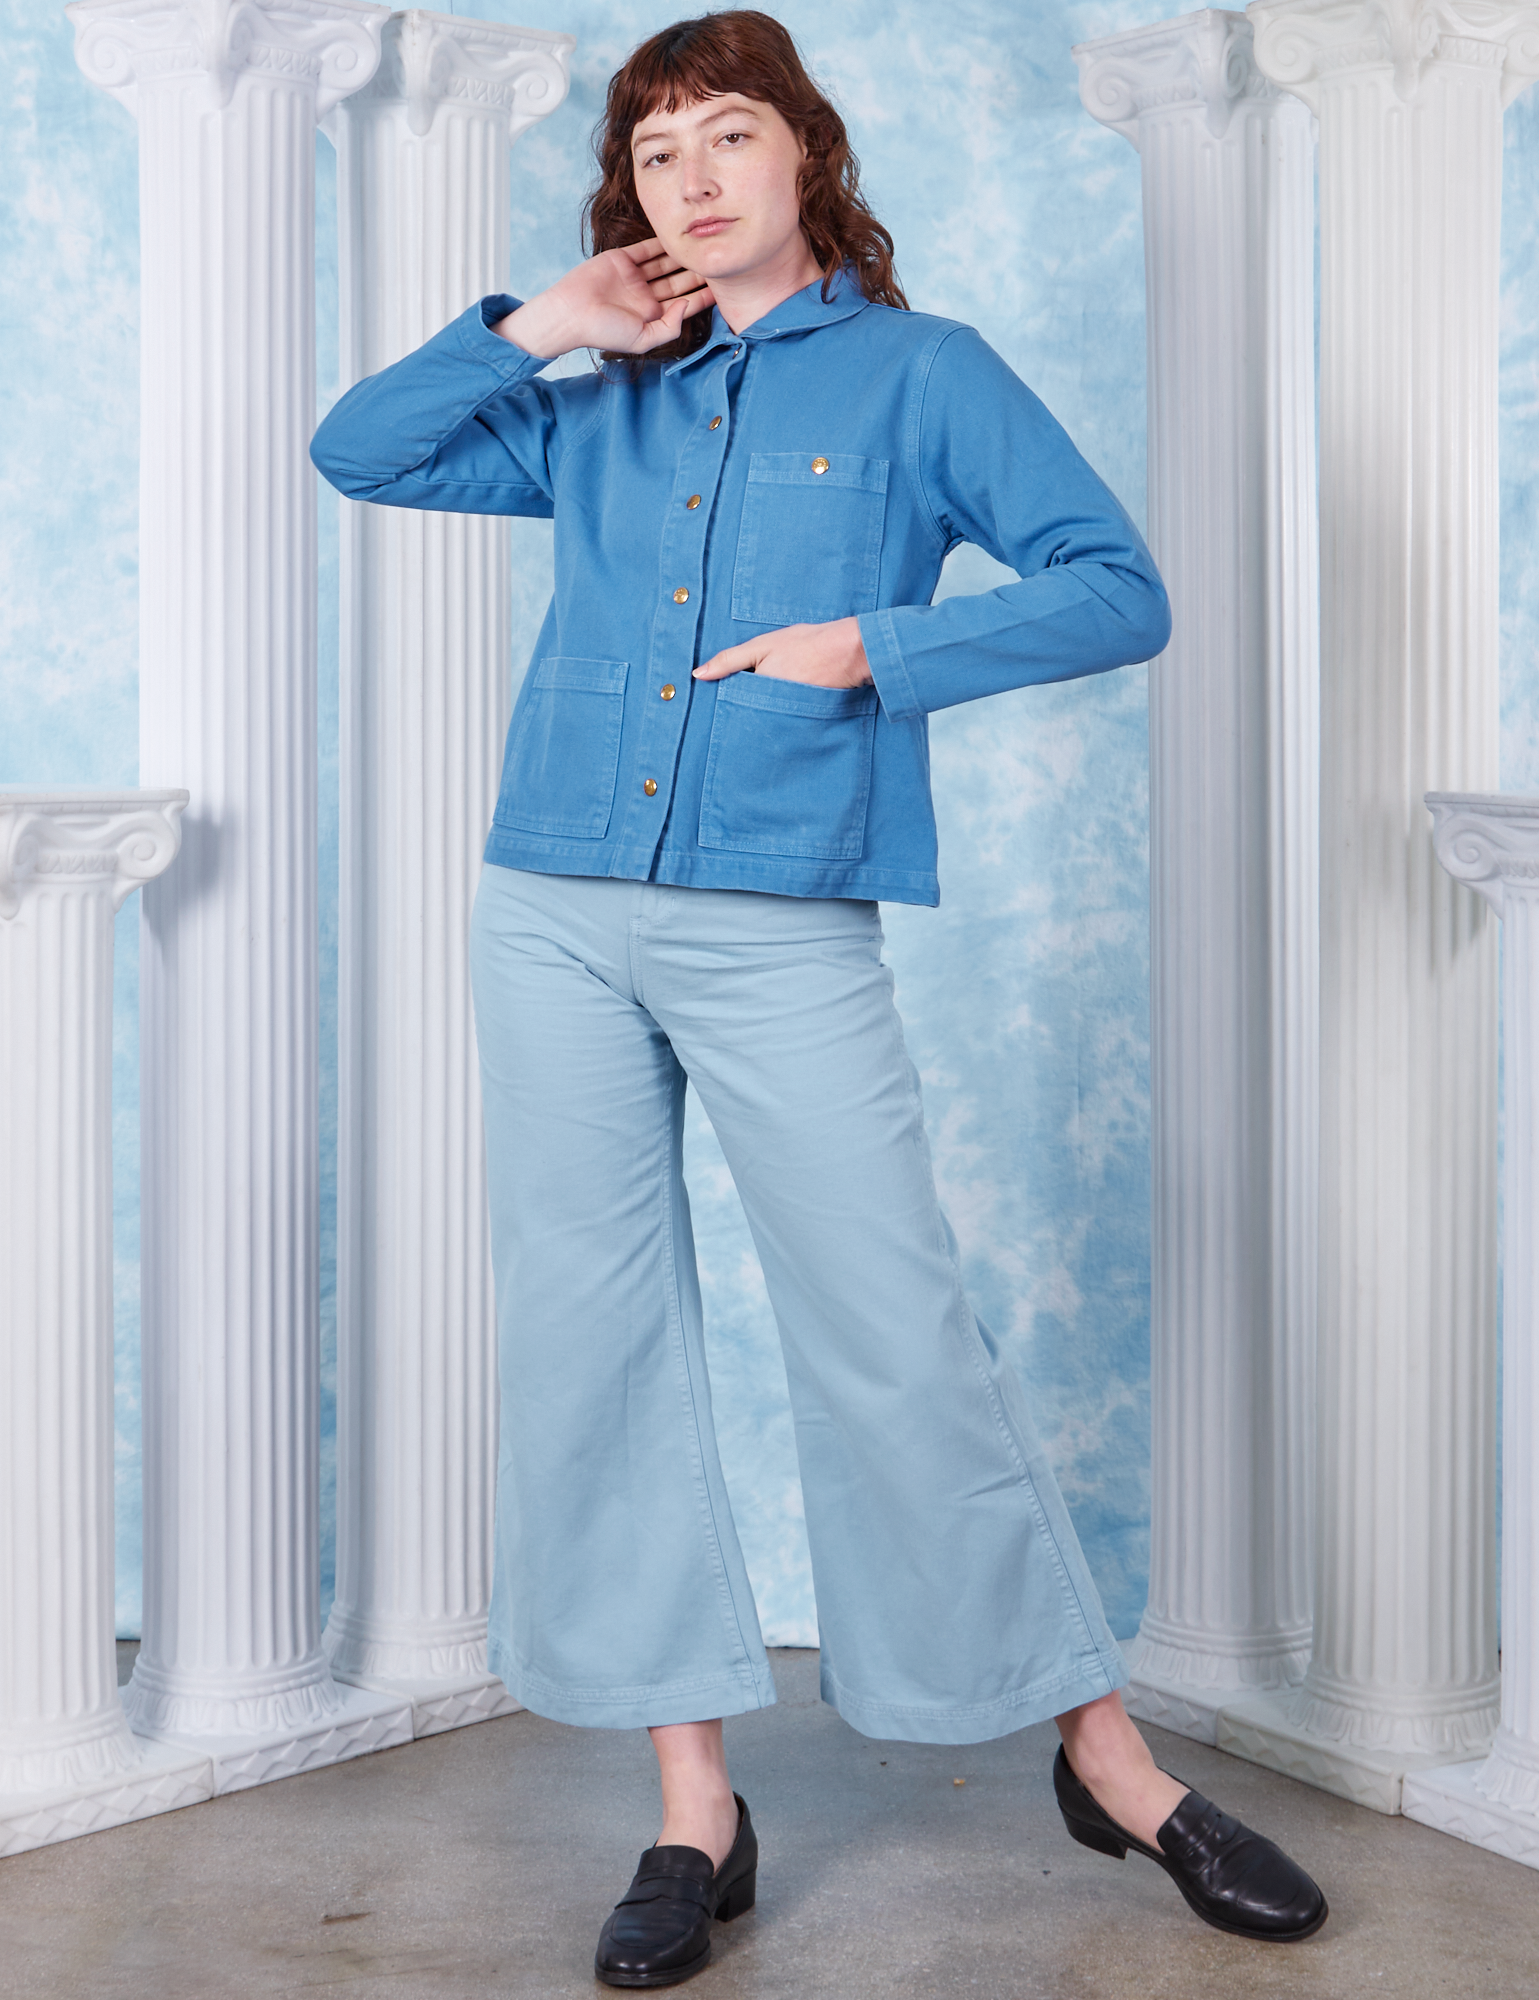 Neoclassical Work Jacket in Blue Venus buttoned up on Alex wearing baby blue Bell Bottoms